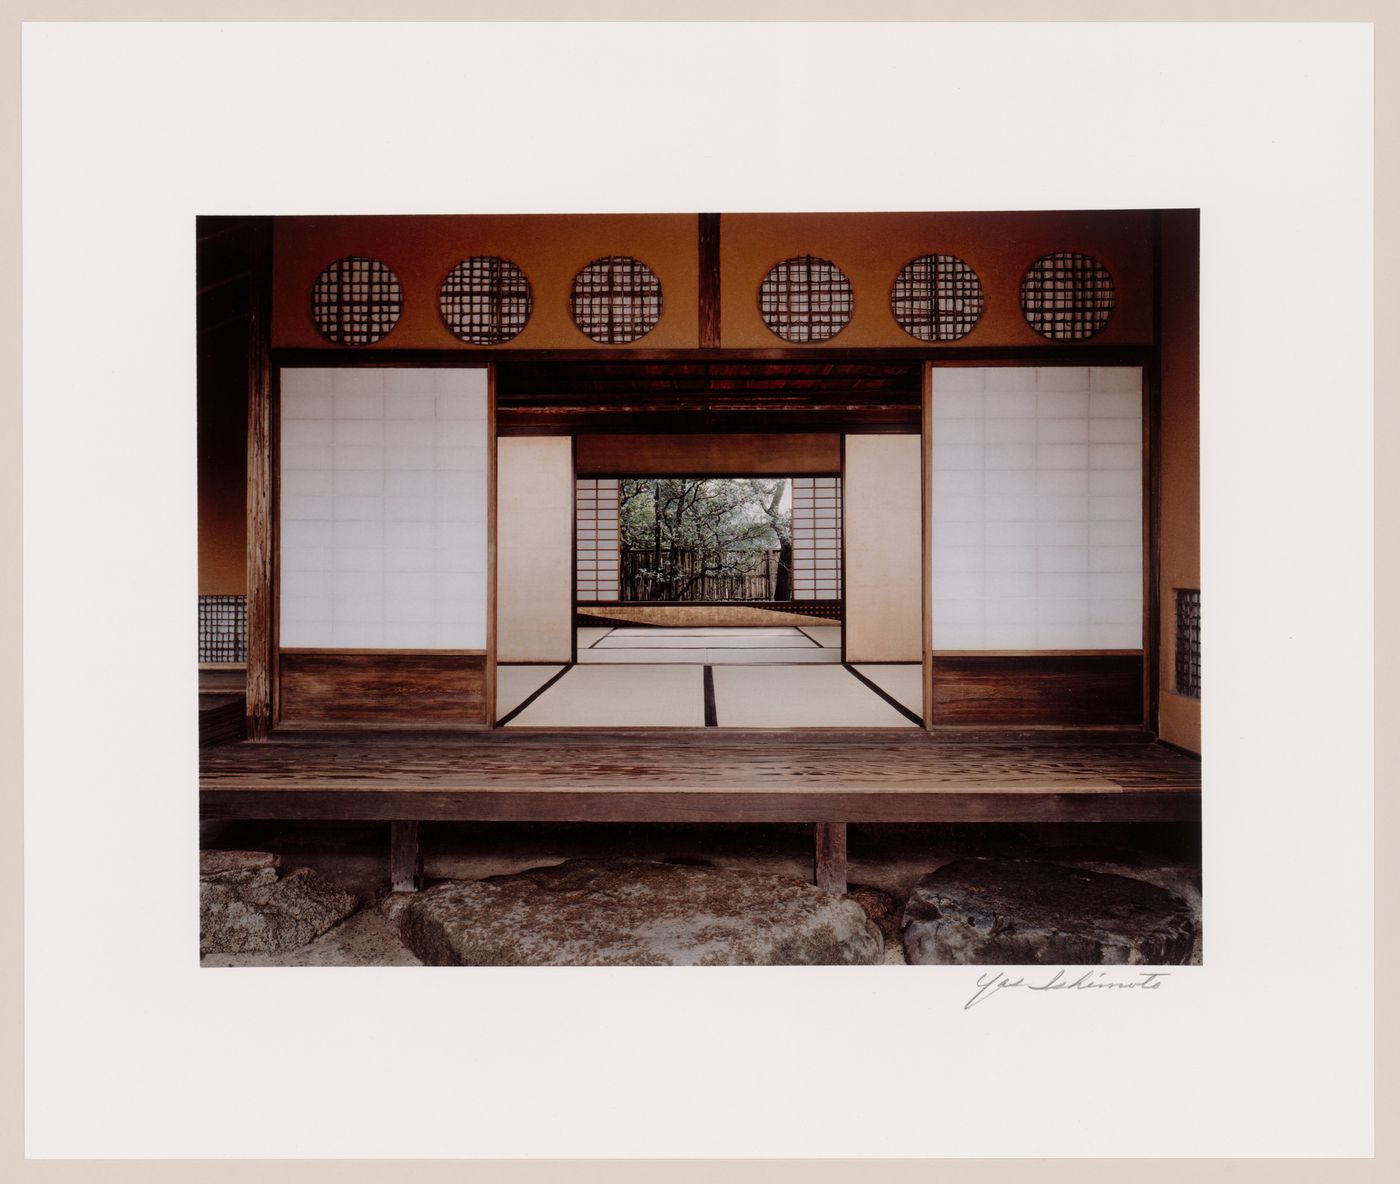 Entrance Room of the Shiken Pavilion, viewed from the North Veranda; Middle Room beyond